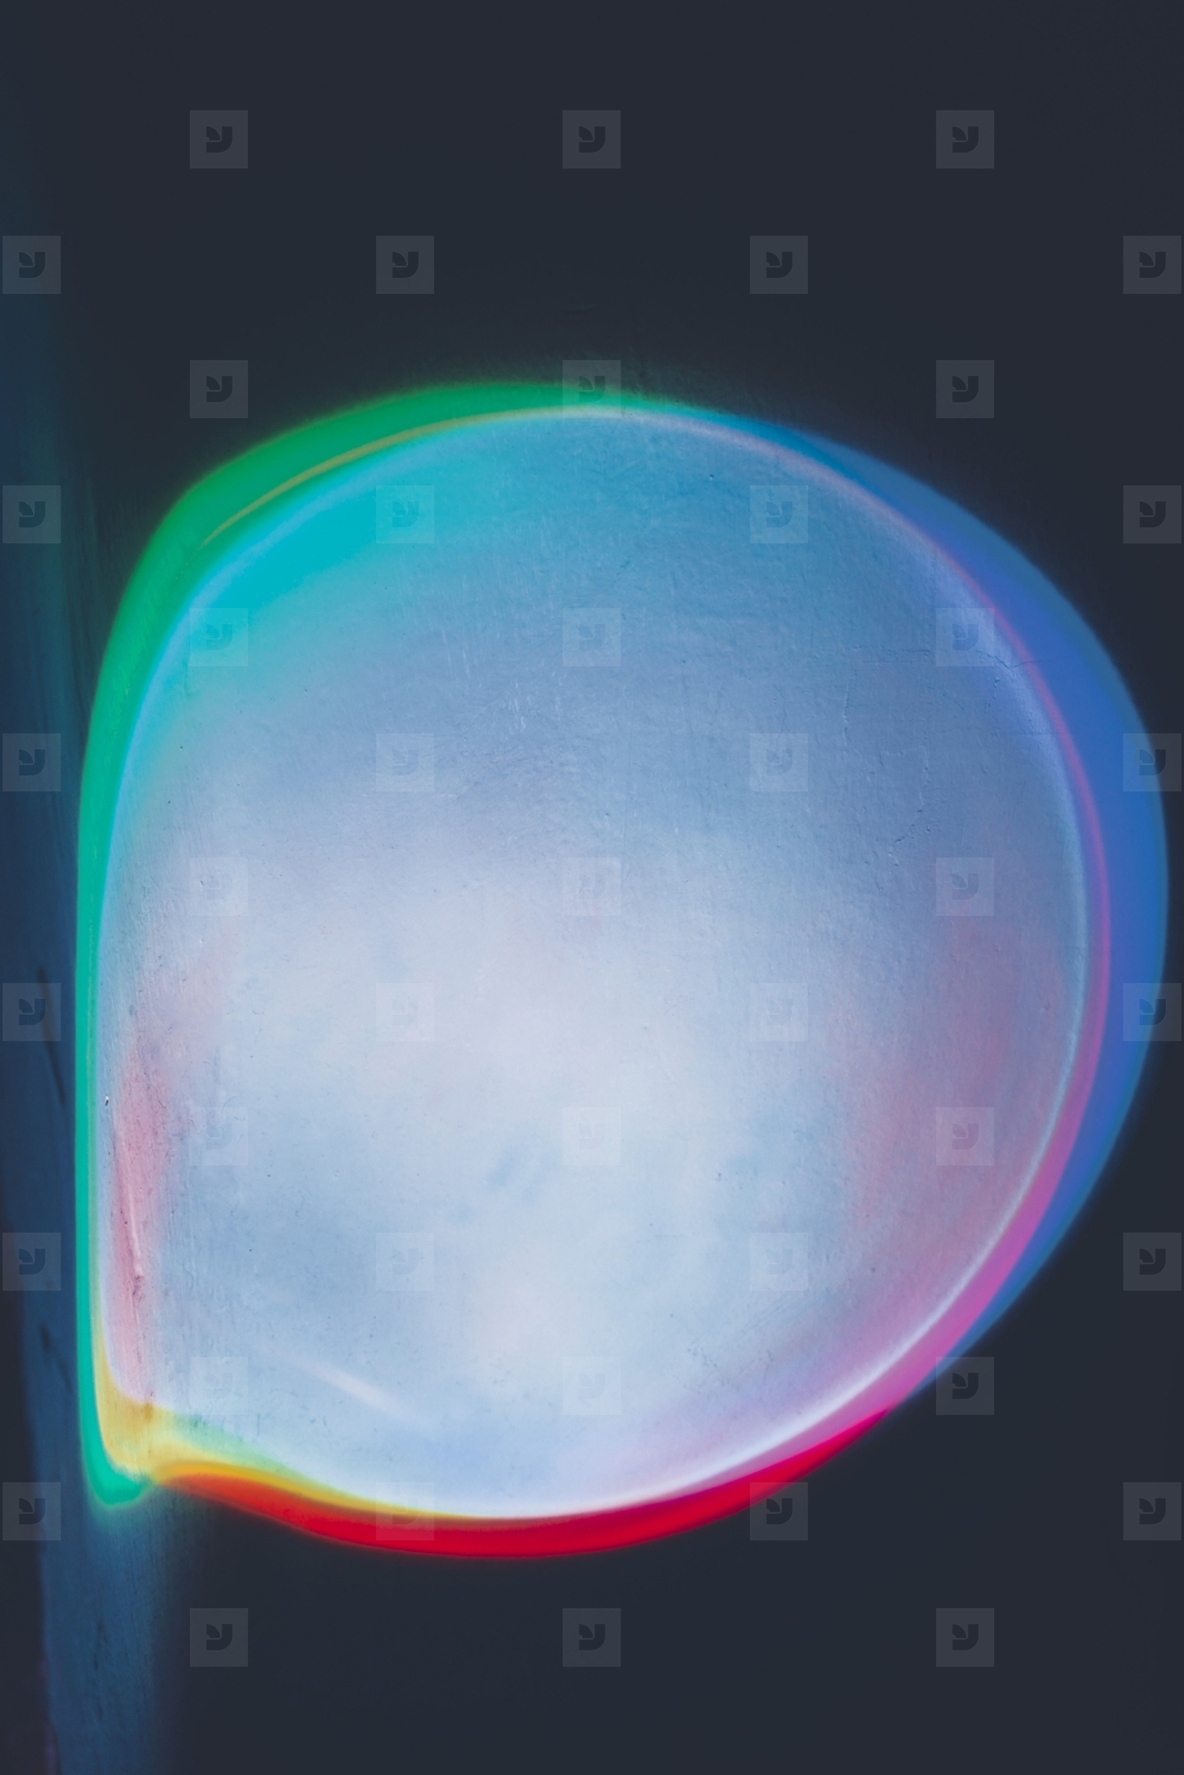 Abstract image of colorful shapes of light against black backgro